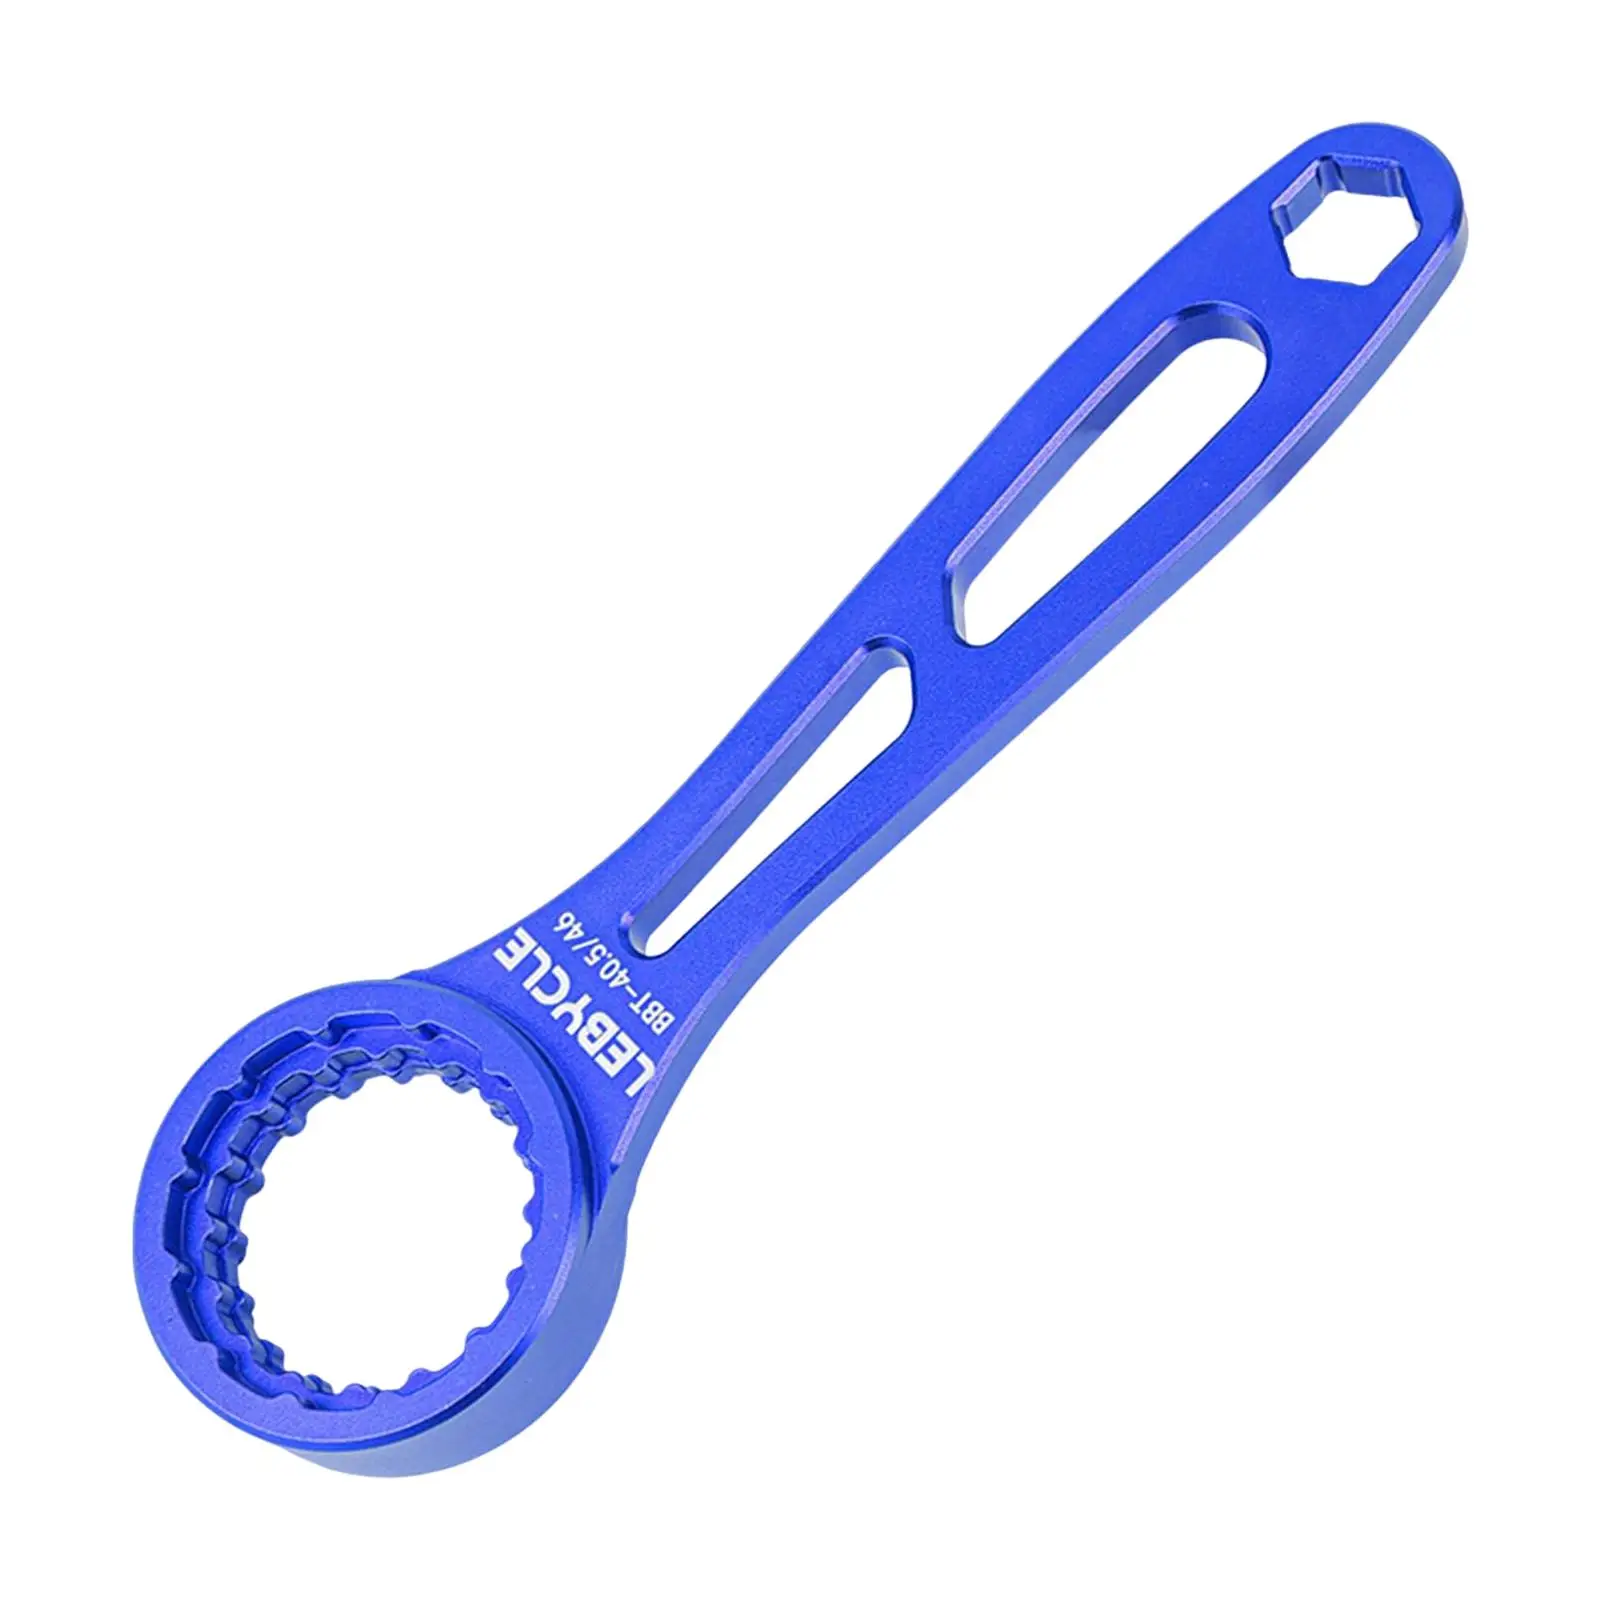   Bottom Bracket Wrench BB Spanner Aluminum Alloy for BB Axis Wrench